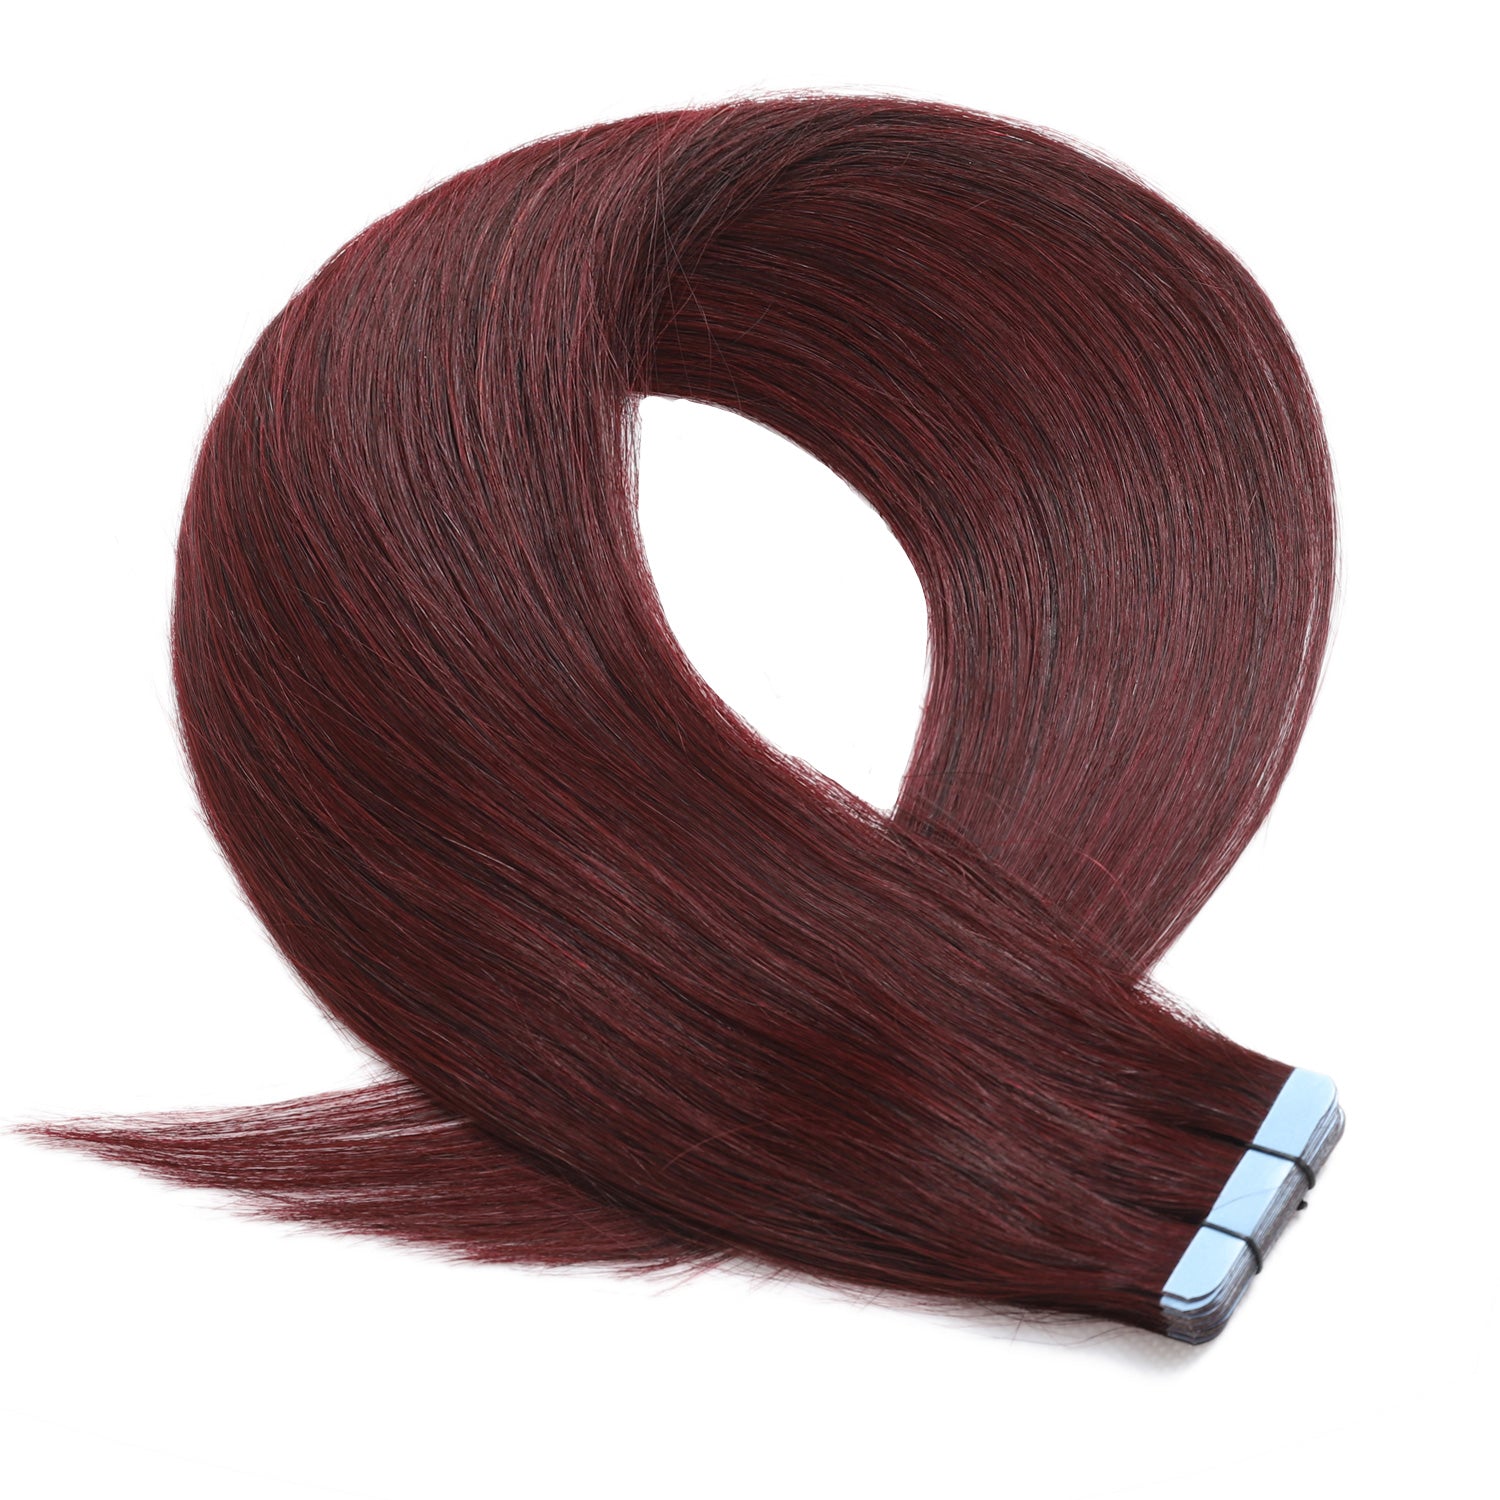 Tape Hair Extensions for Fine and Thin Hair, Mahogany, Human Hair Extensions